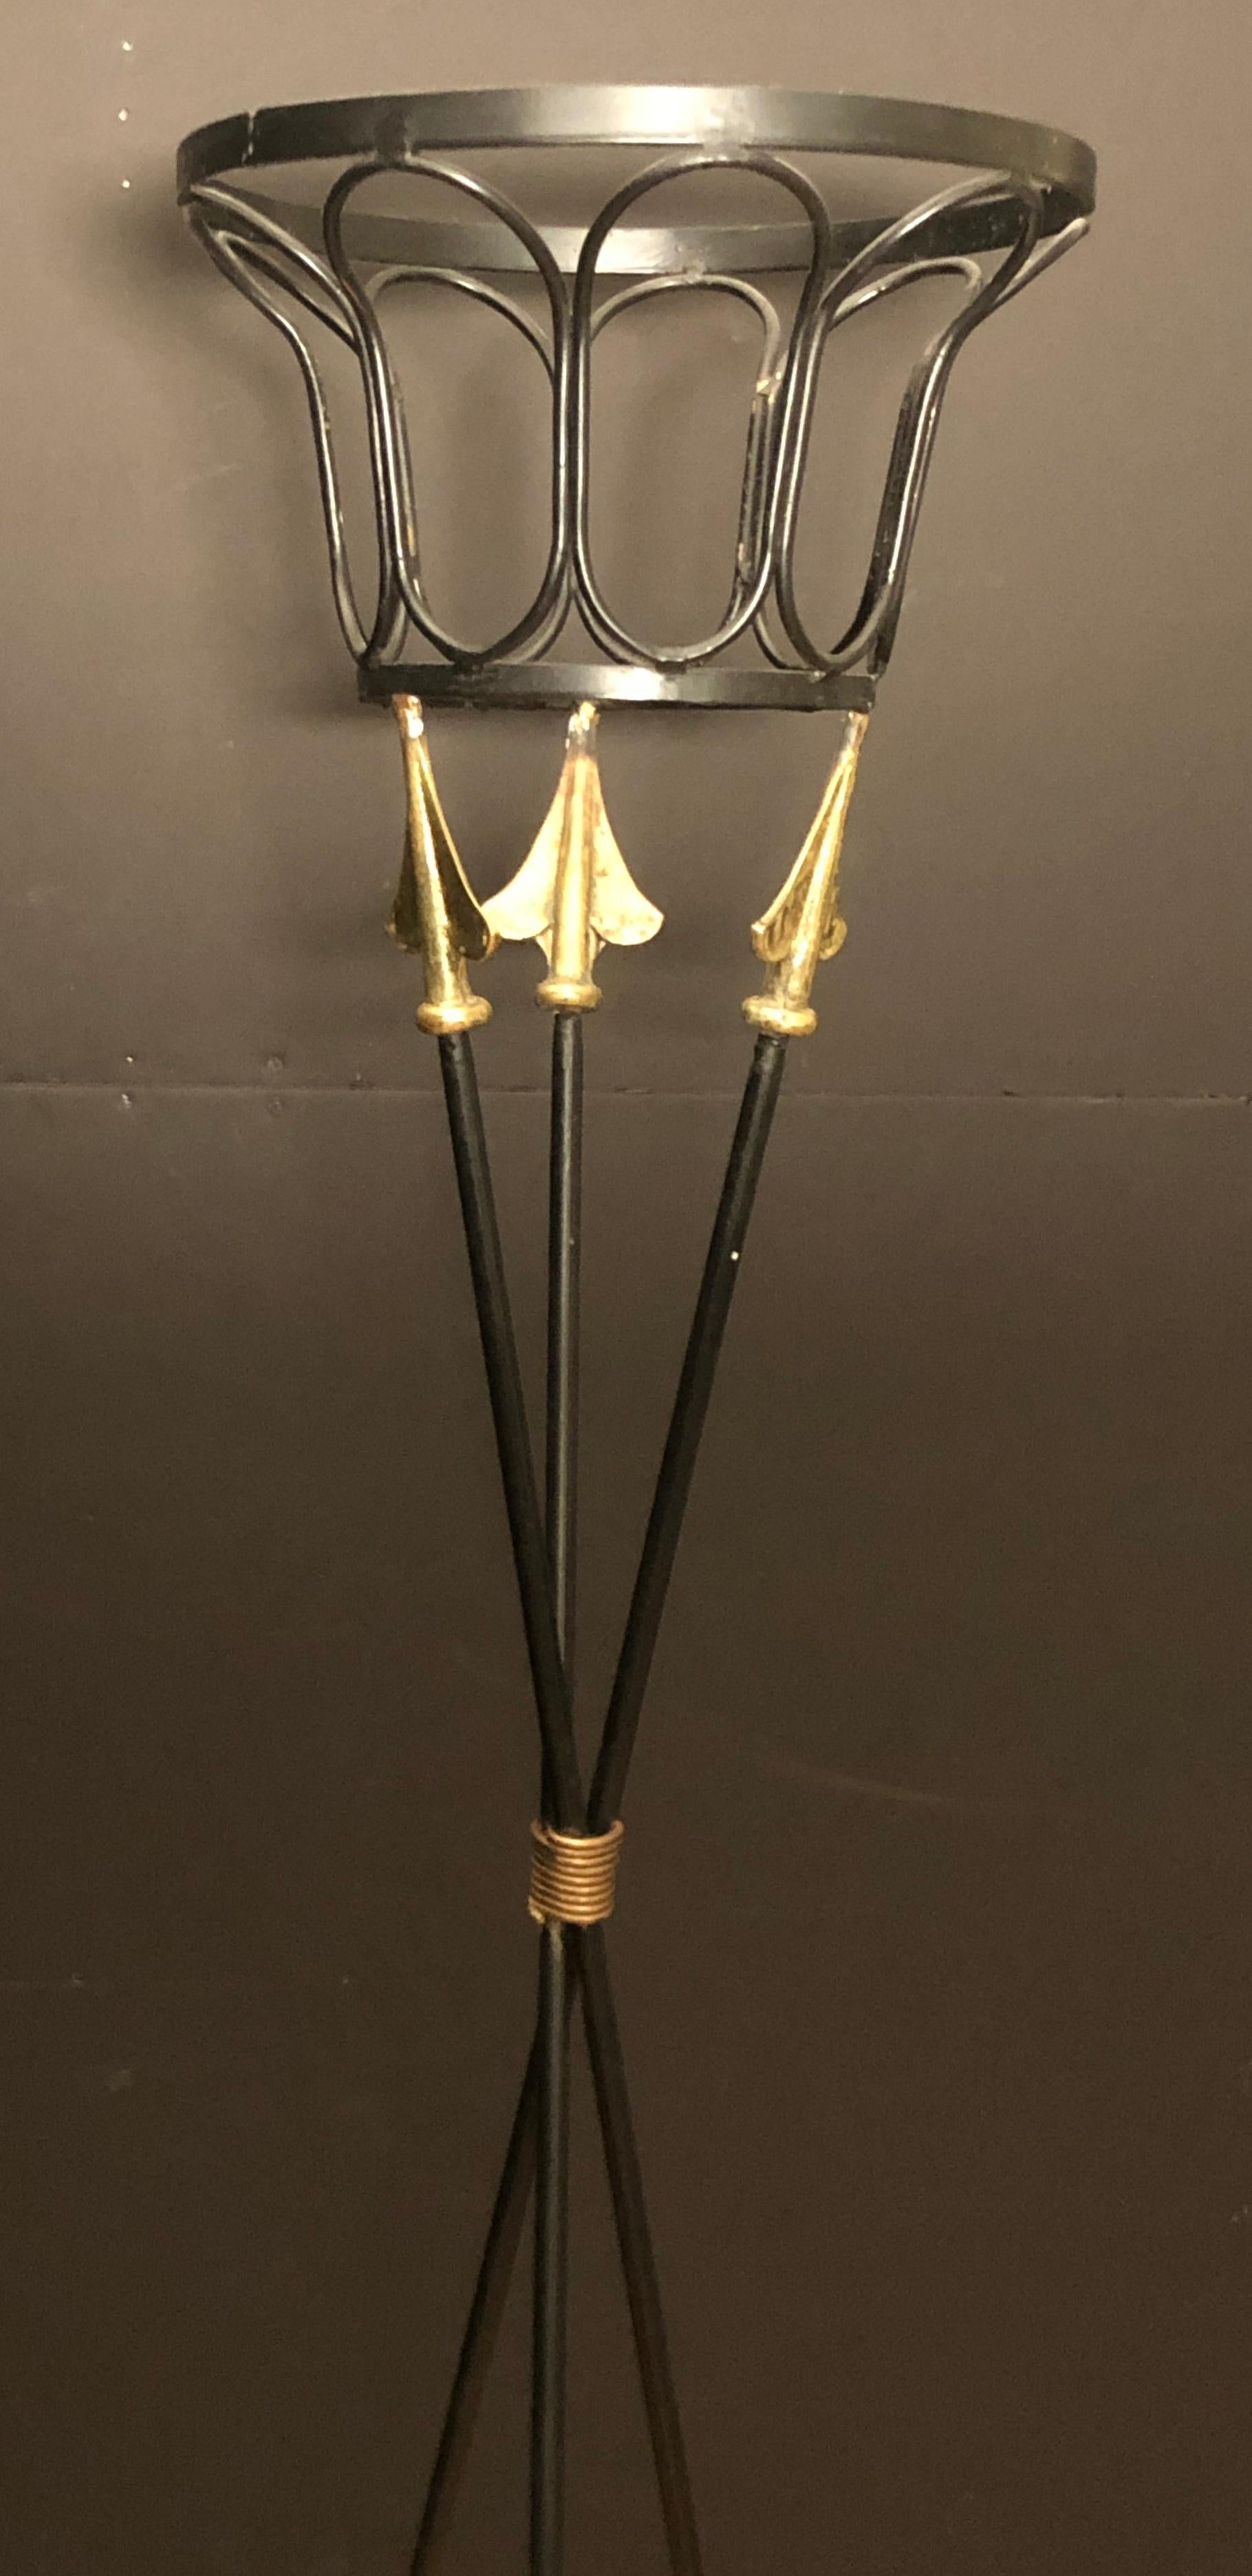 Iron and brass stylized neoclassical style torchère plant stand.
13